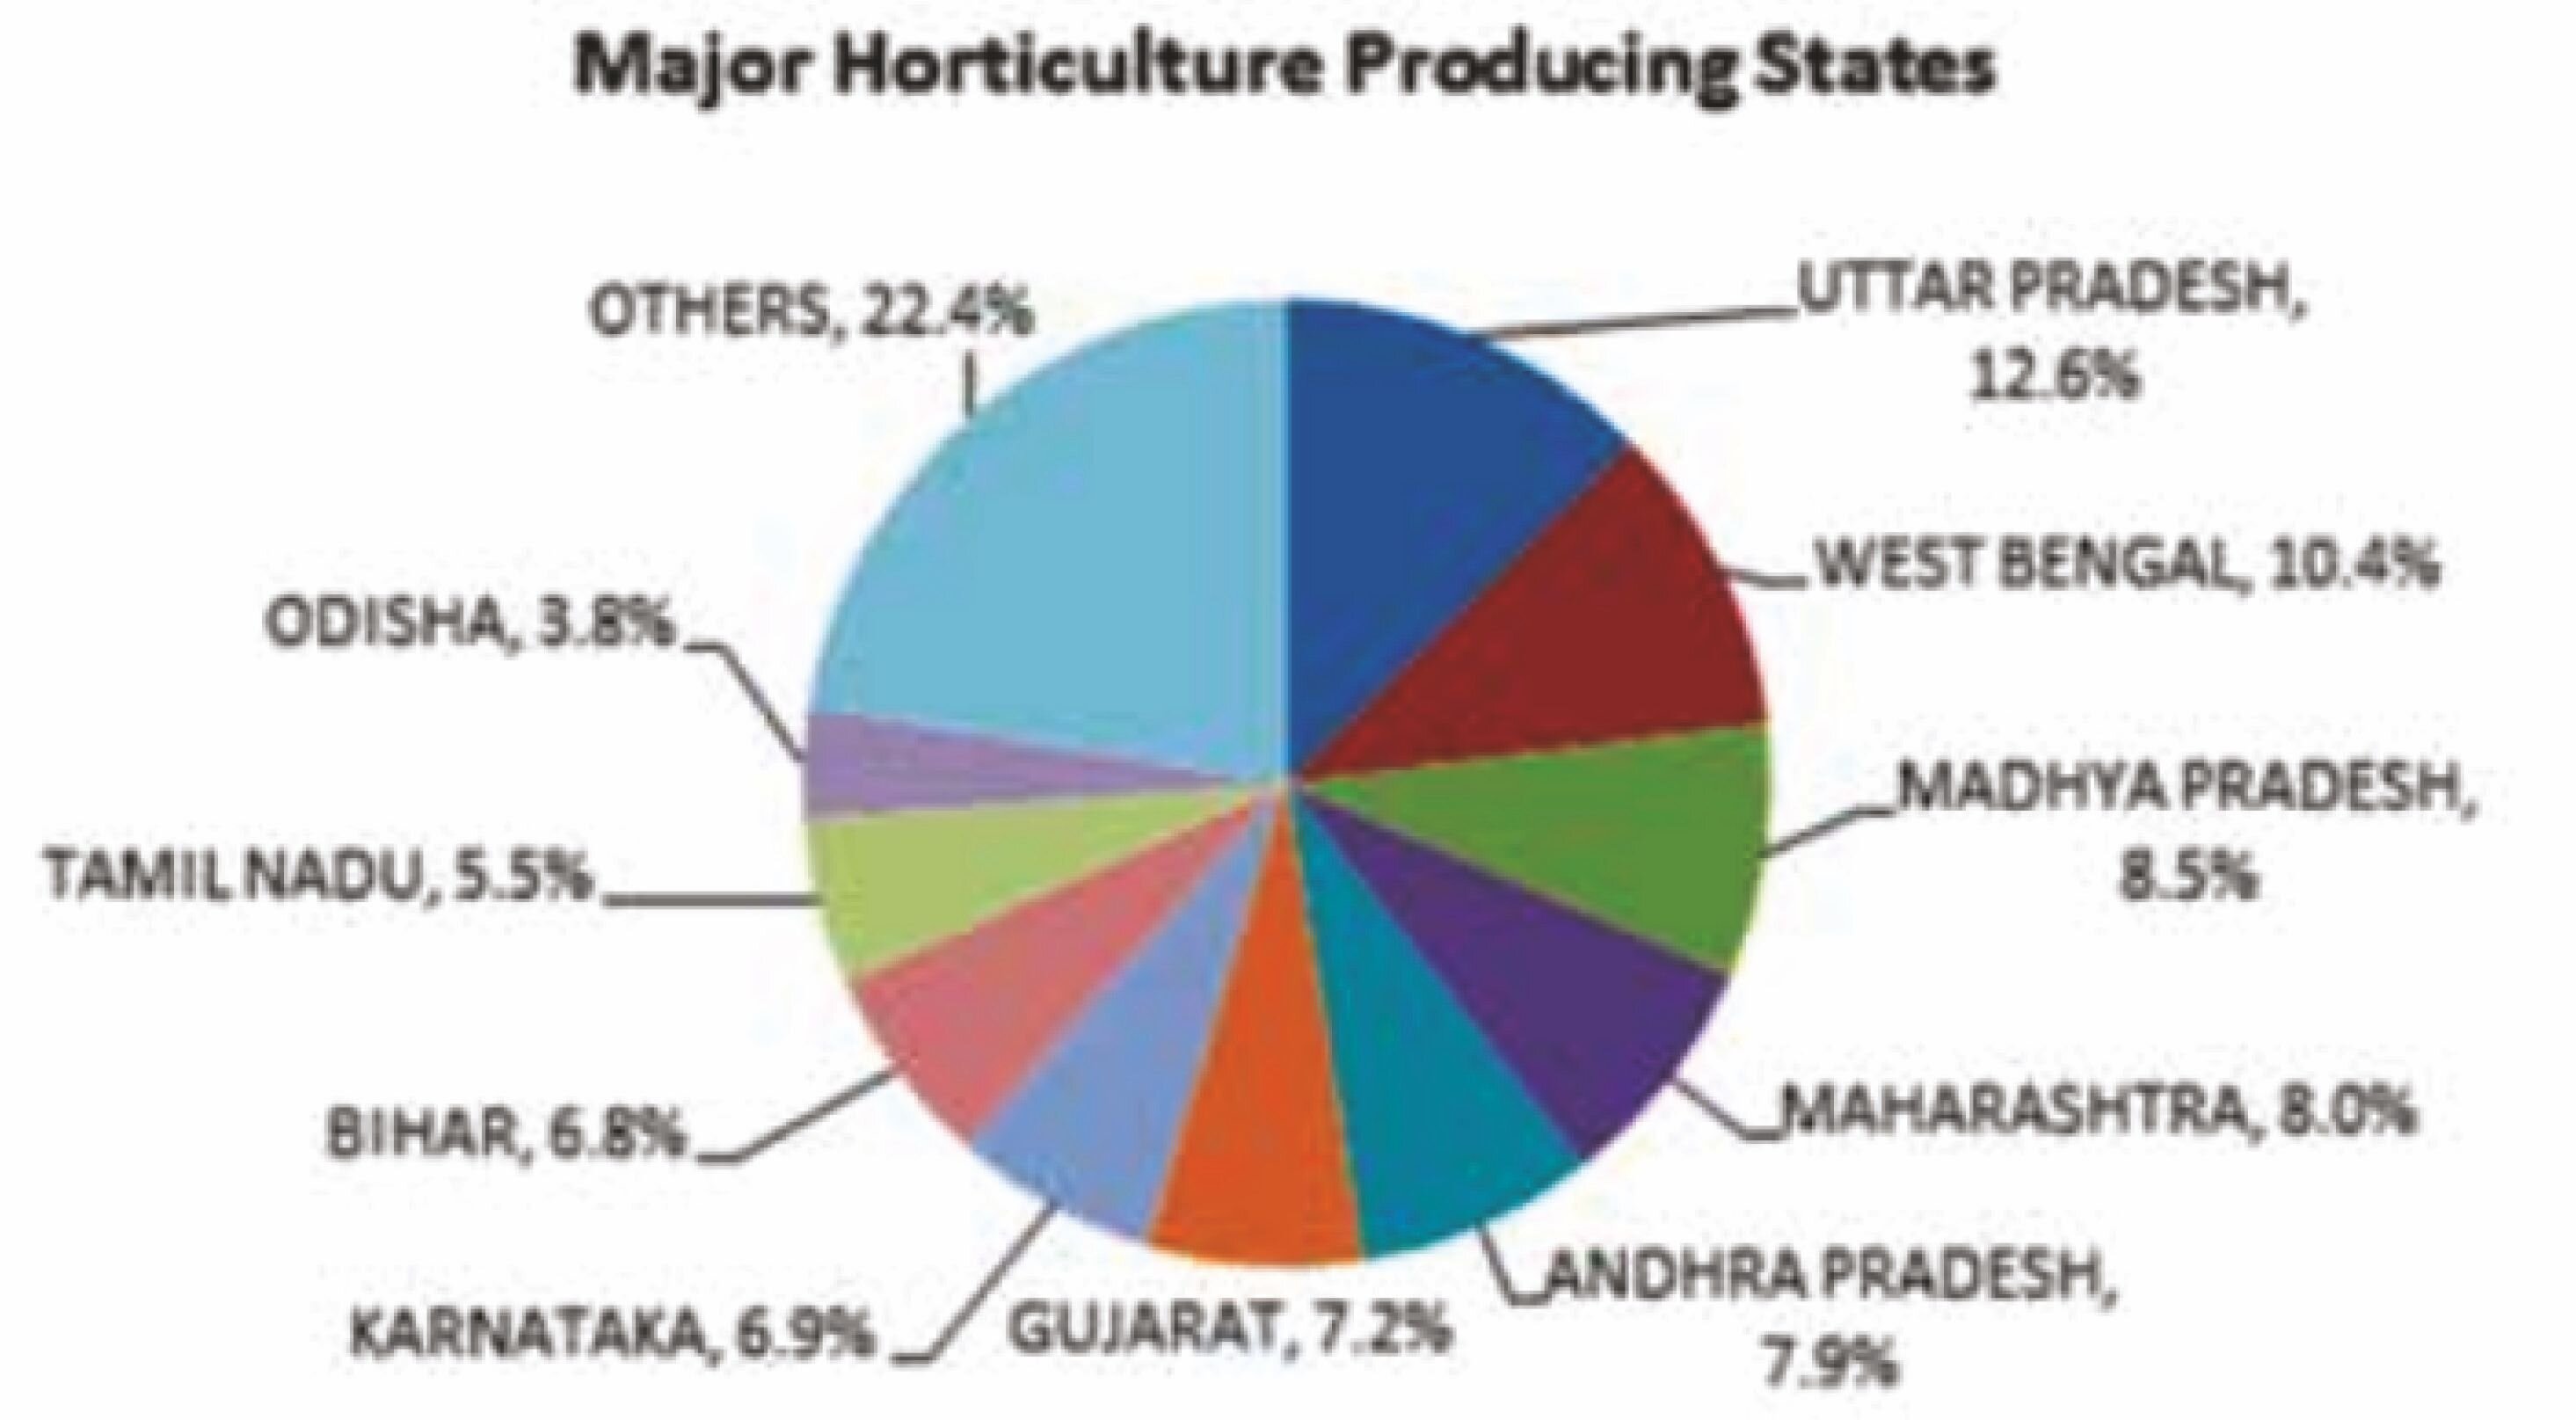 Horticulture Sector in India